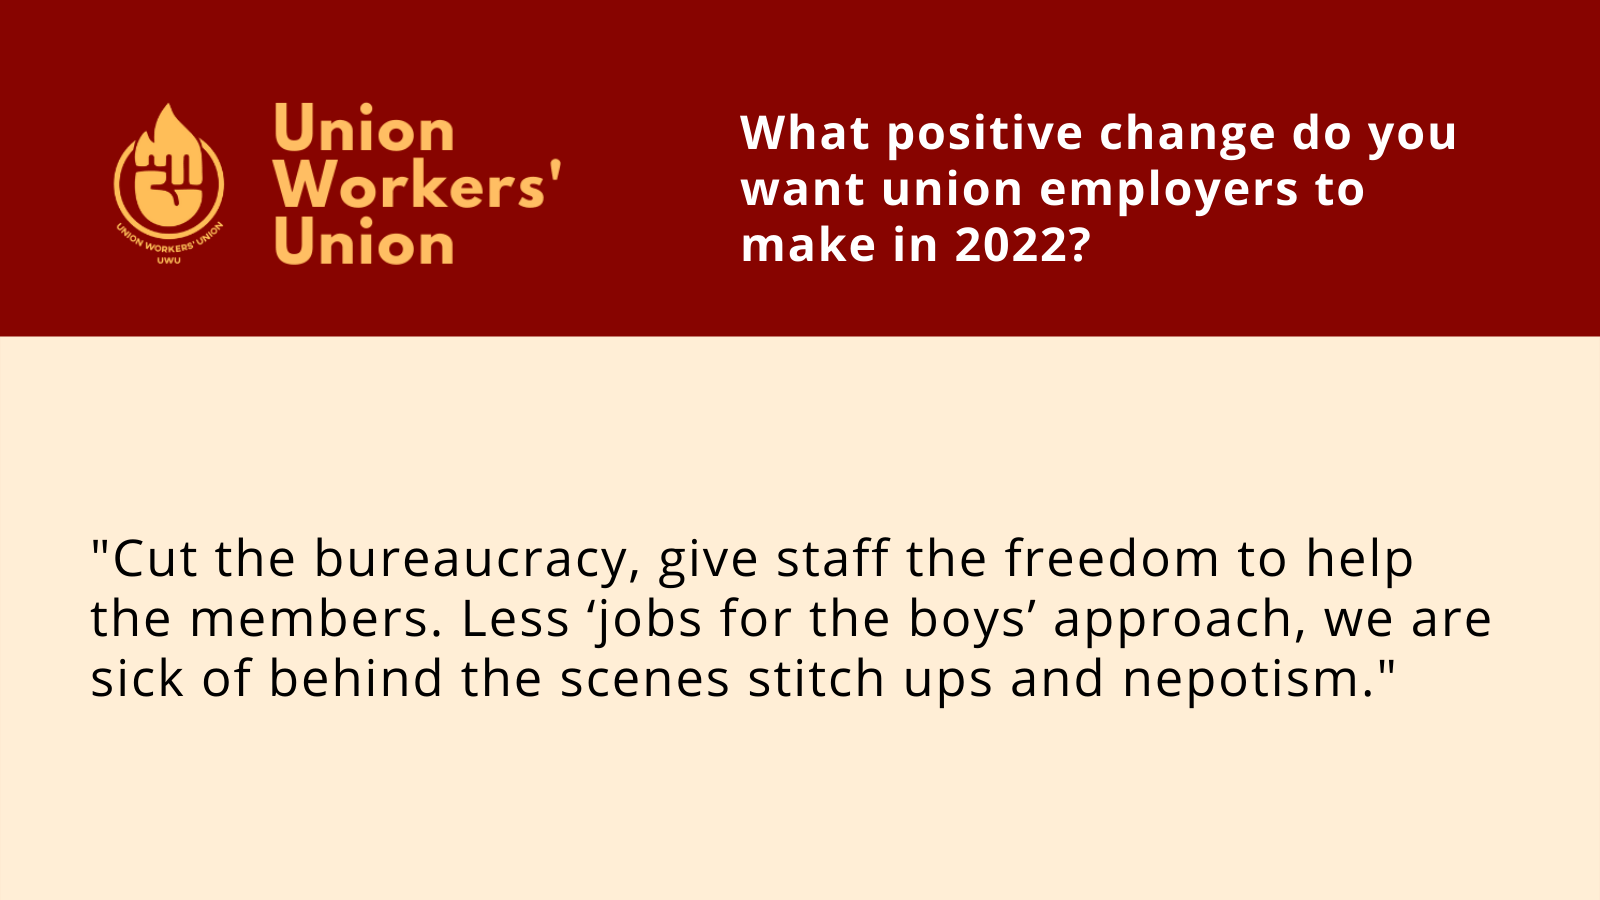 UWU logo next to the question, what positive change do you want union employers to make in 2022? Member response: Cut the bureaucracy, give staff the freedom to help the members. Less ‘jobs for the boys’ approach, we are sick of behind the scenes stitch ups and nepotism.